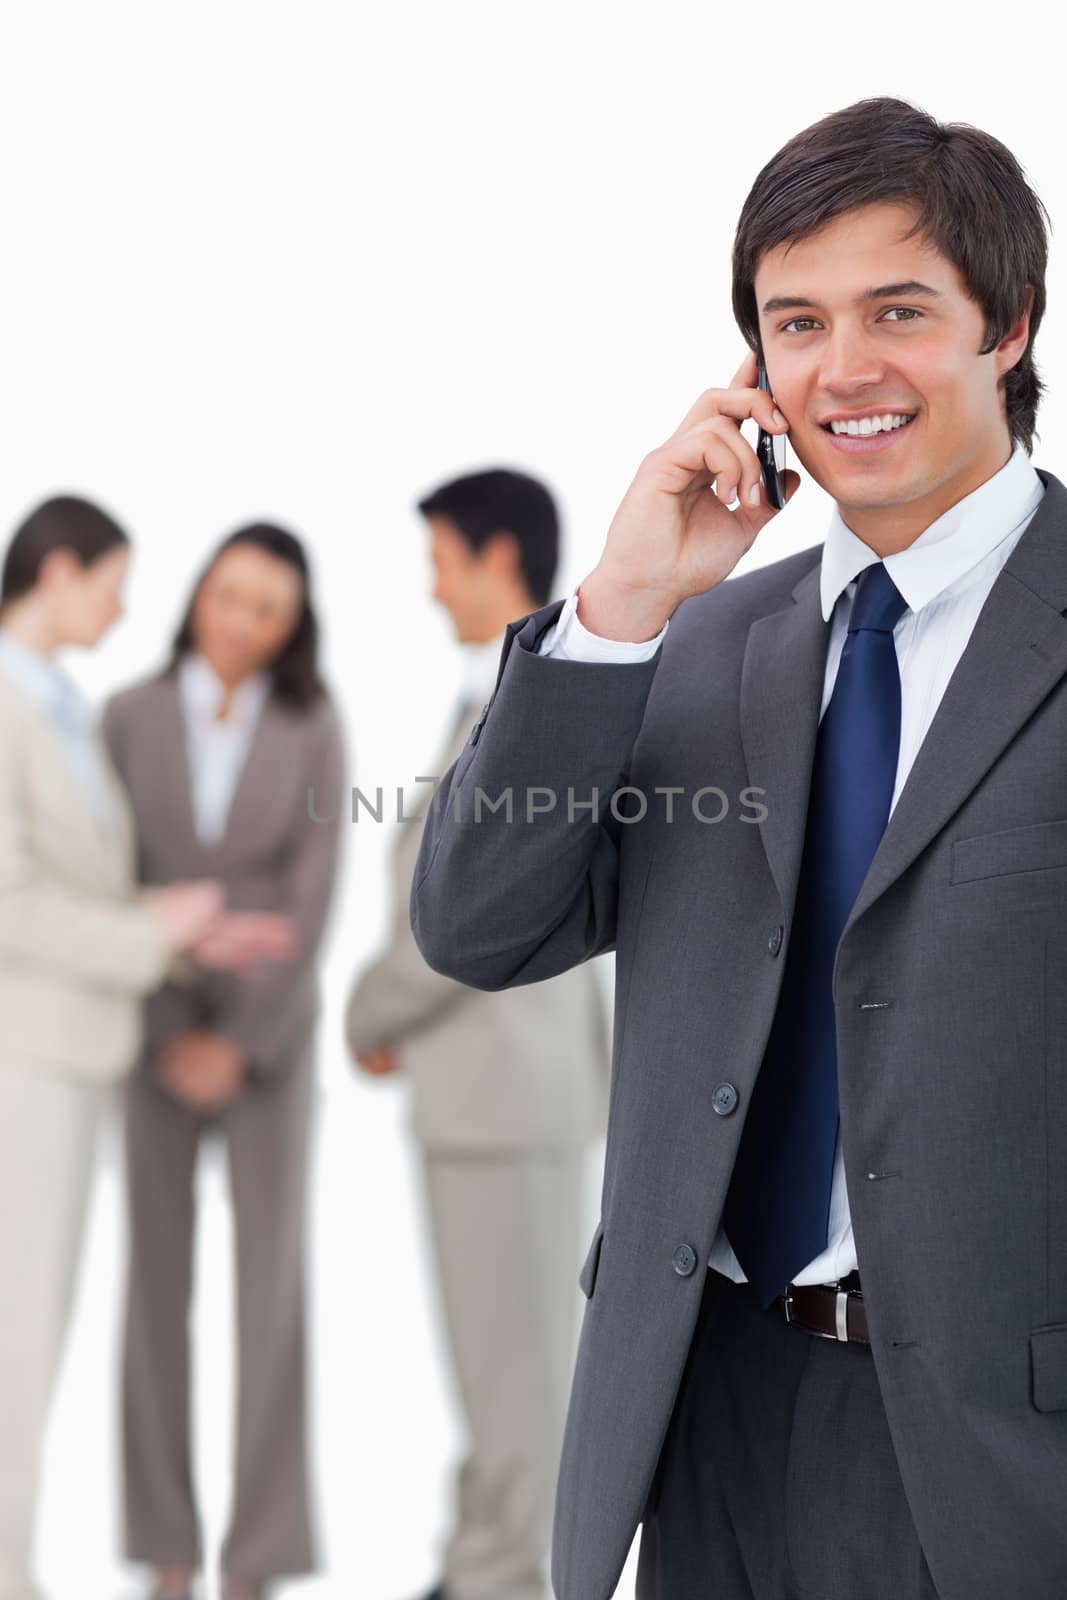 Smiling salesman on cellphone with team behind him against a white background